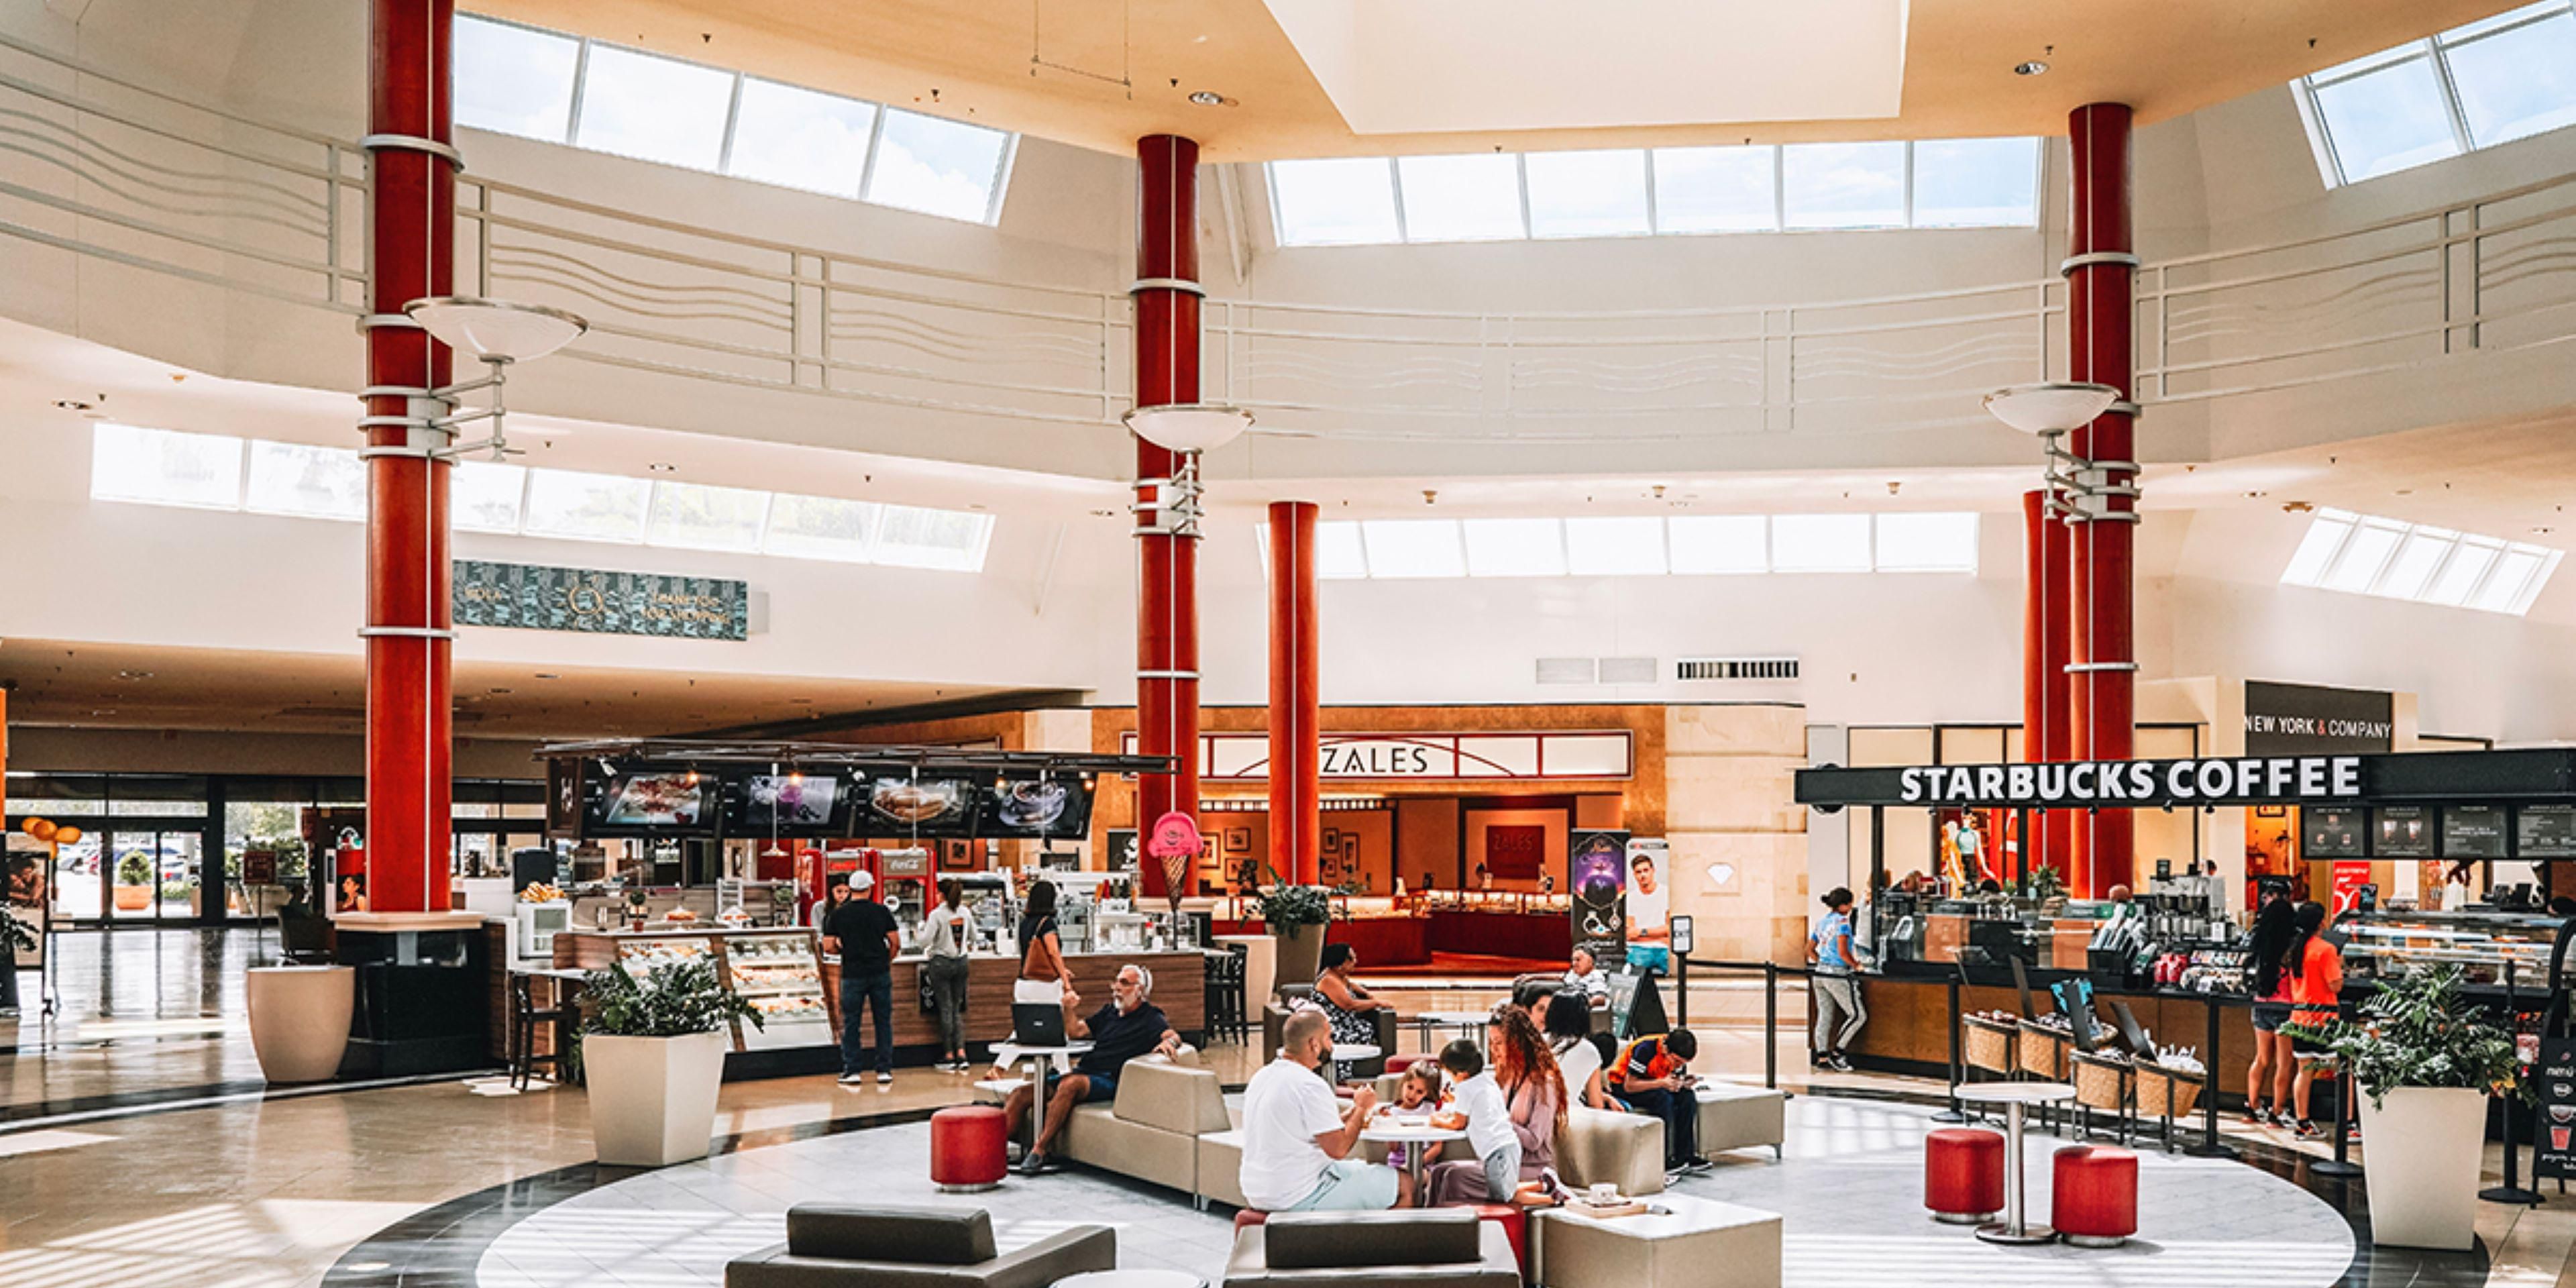 Imagine being able to enjoy your favorite shops at your leisure? The Holiday Inn Express location allows that! Miami's International Mall is home to some of your favorite retailers and is located only steps away from our front door.